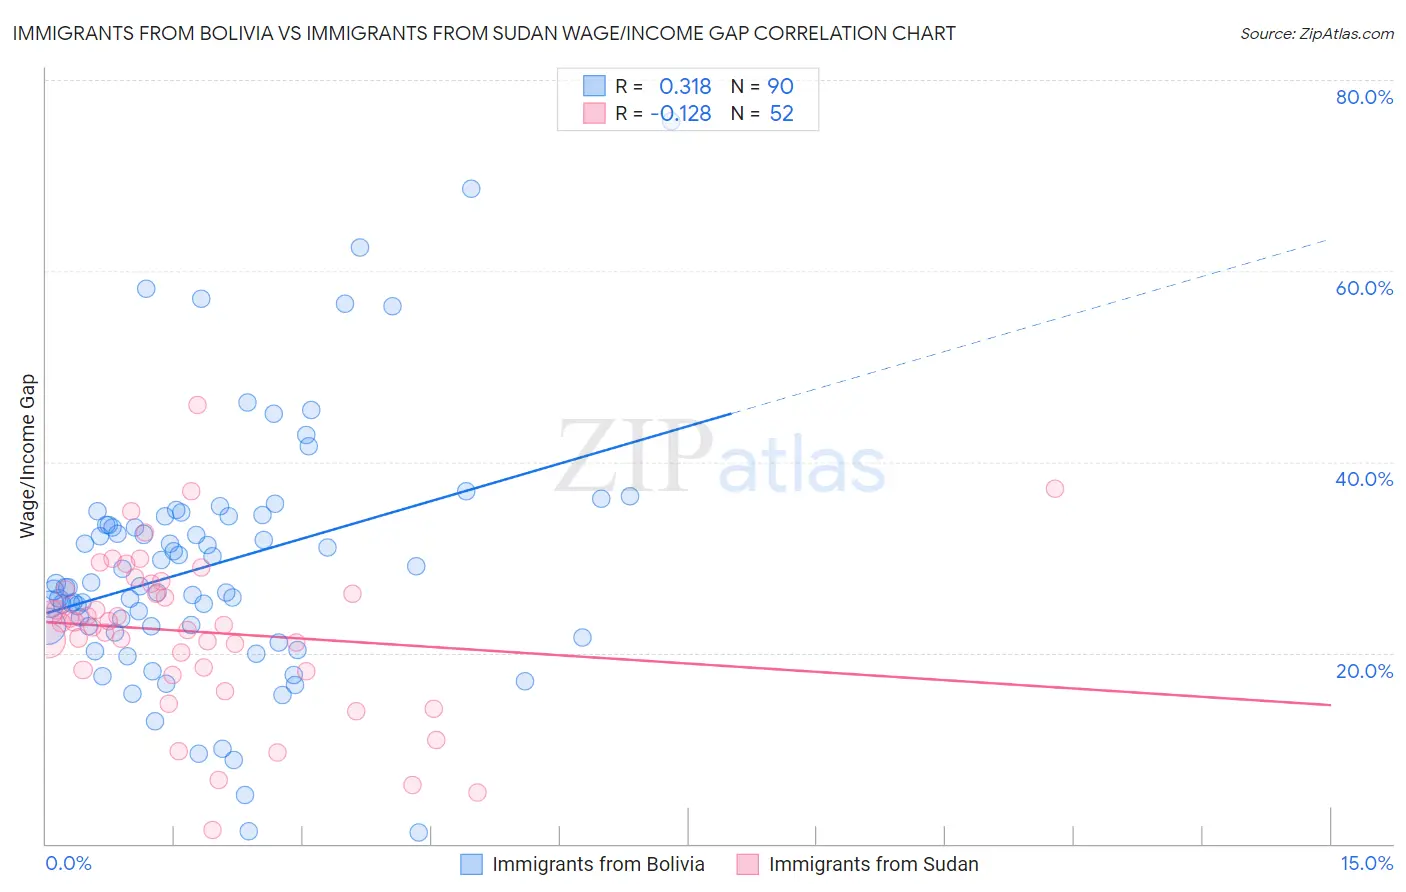 Immigrants from Bolivia vs Immigrants from Sudan Wage/Income Gap